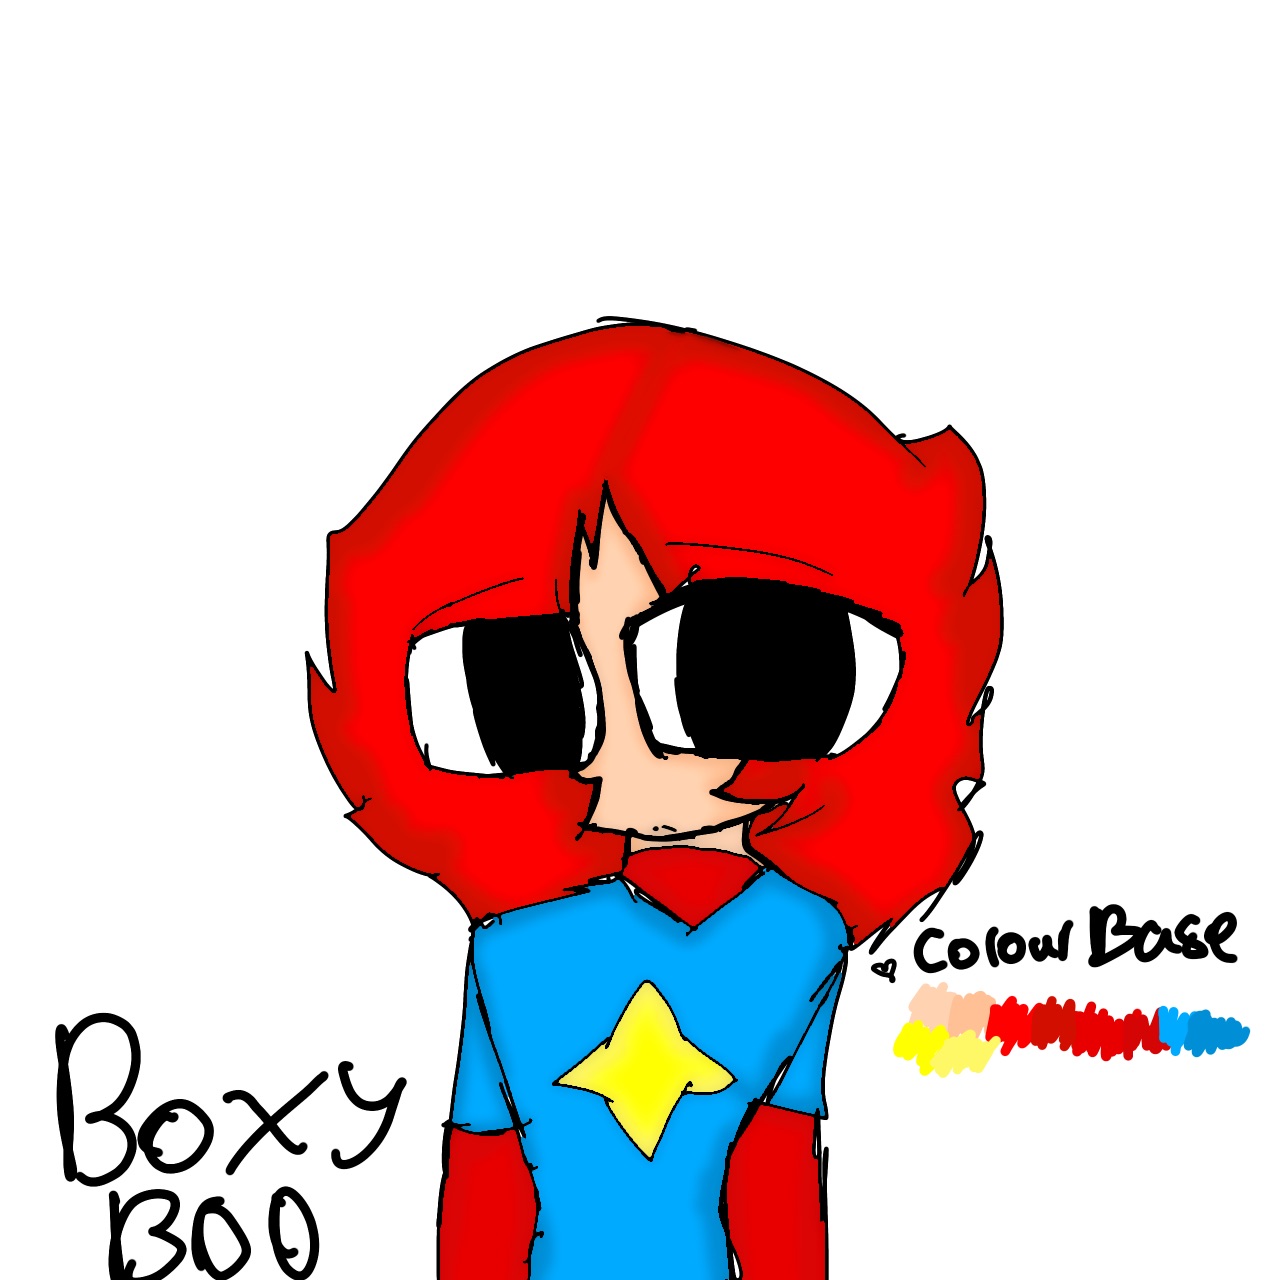 Human Boxy Boo by Mon1ty on DeviantArt